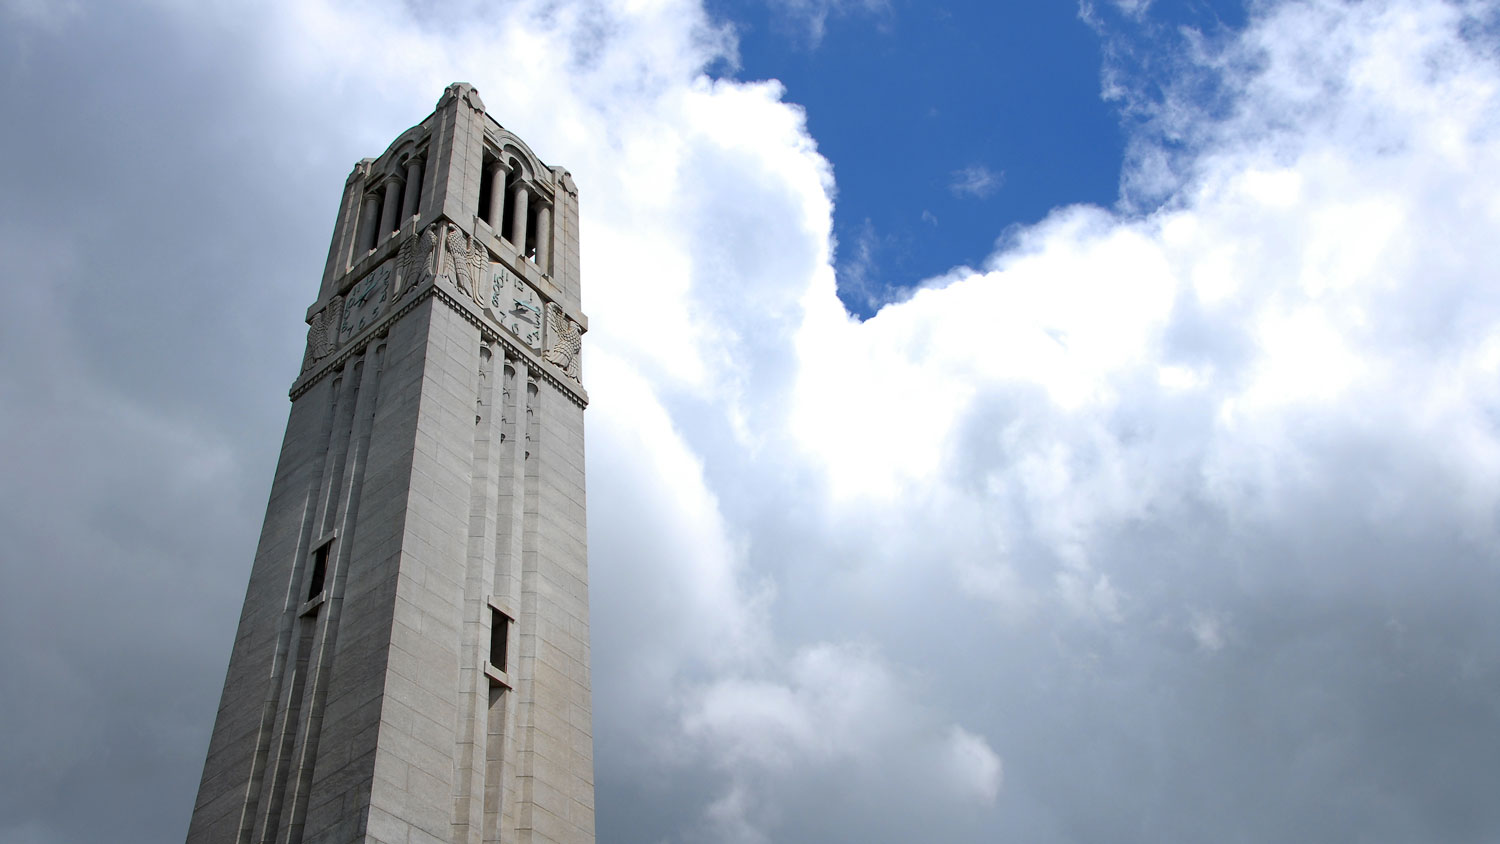 The belltower on a cloudy day